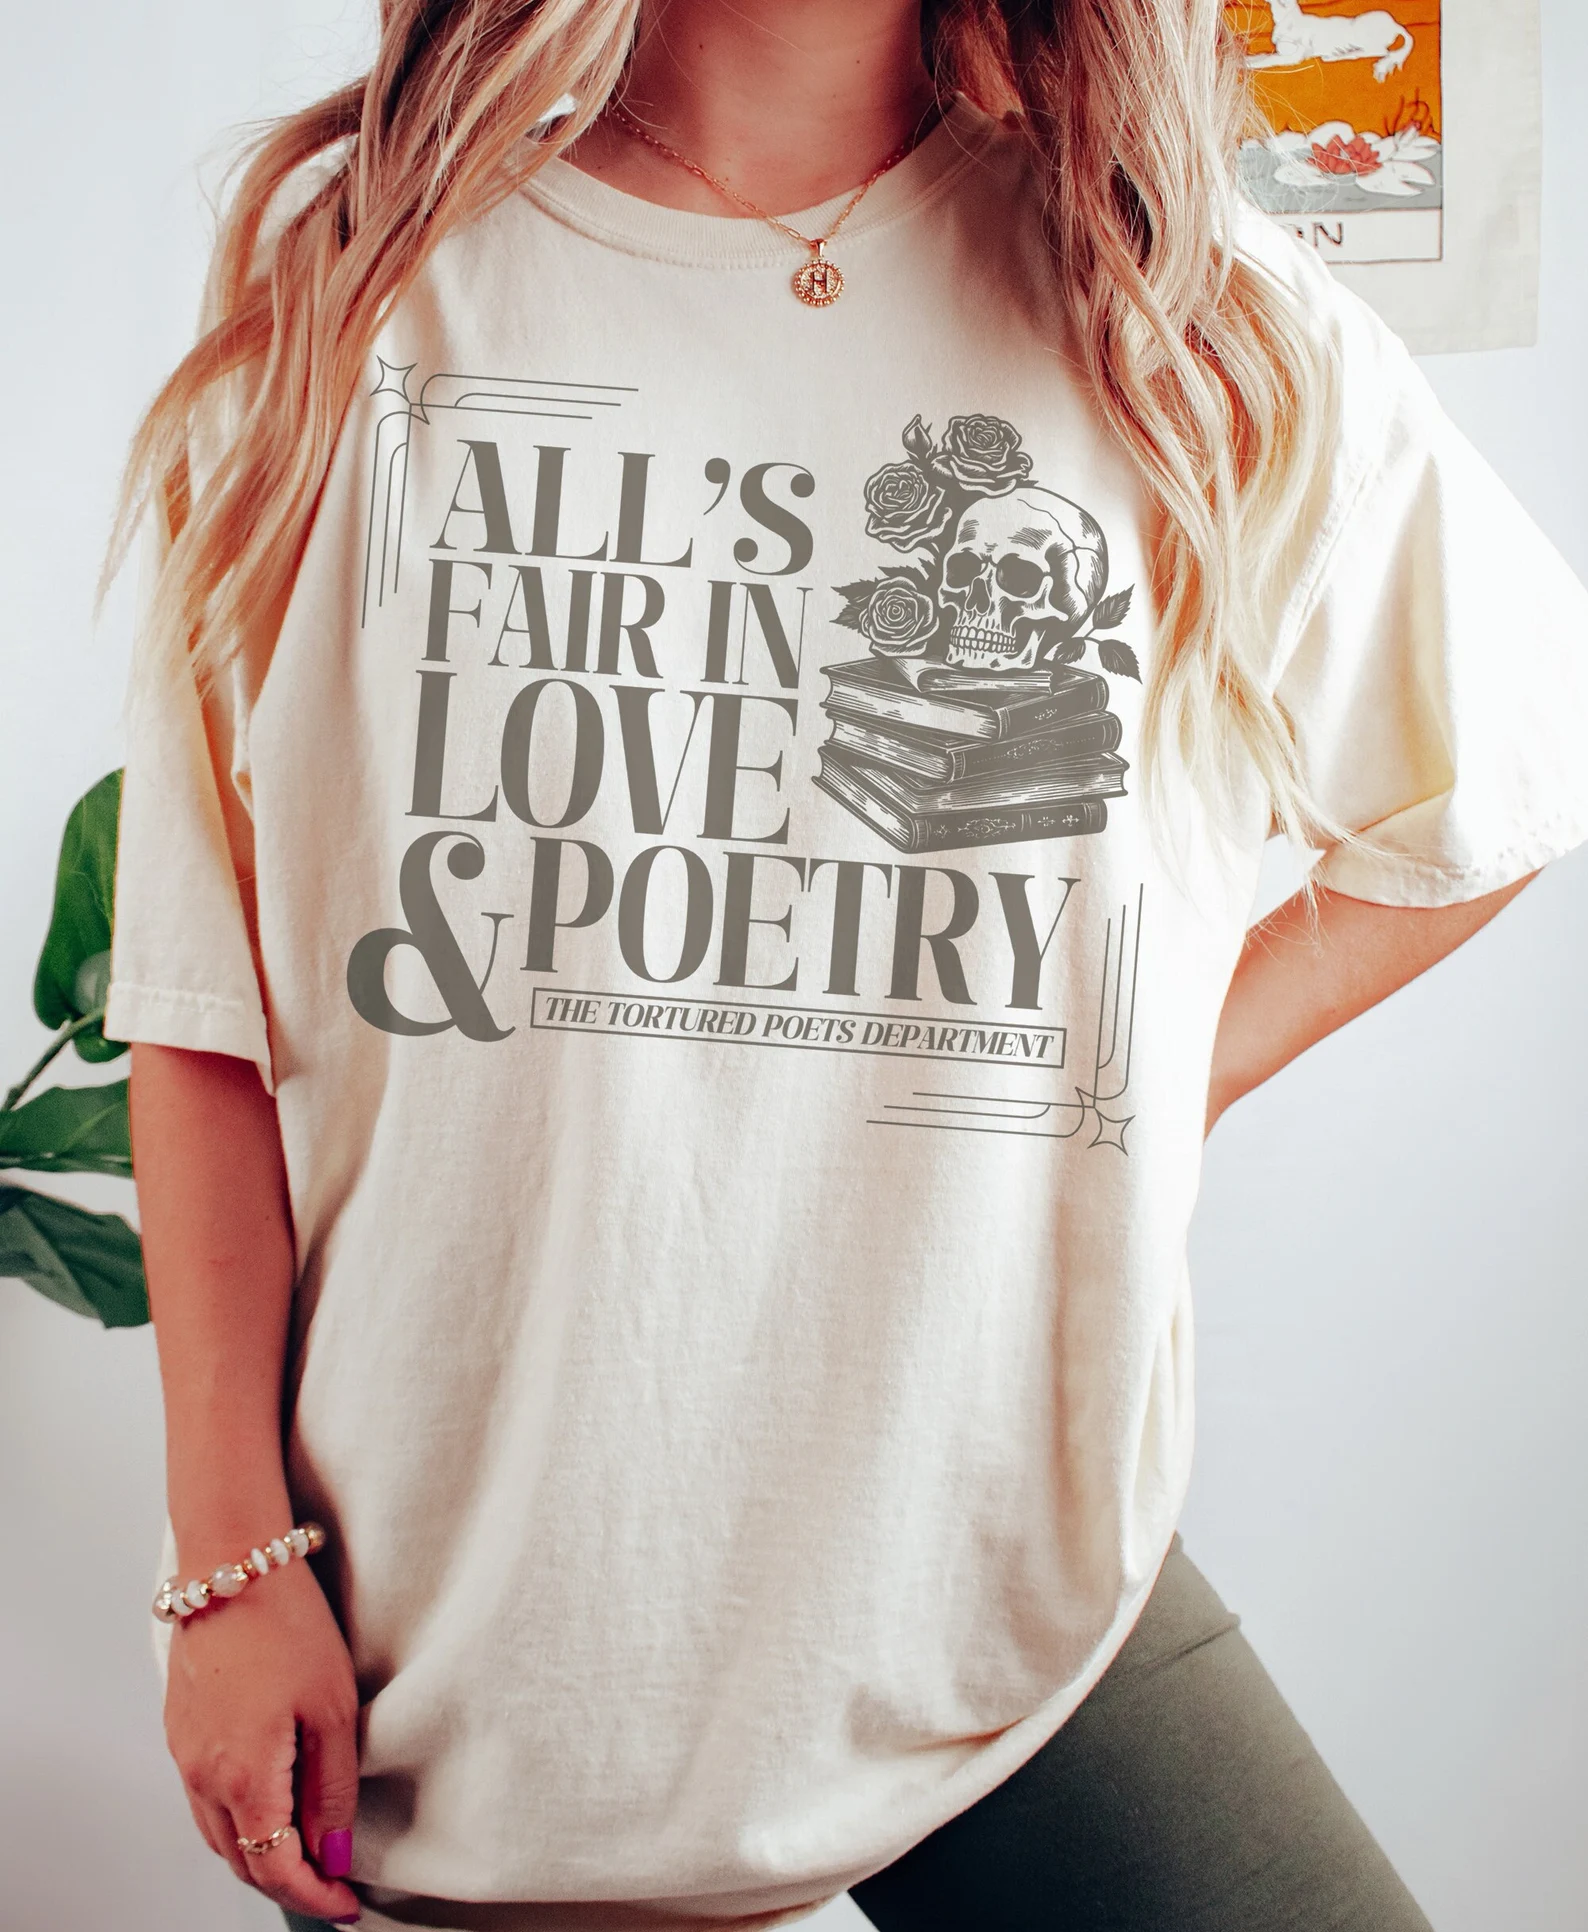 Cream color t-shirt that says "All's fair in love & poetry: The Tortured Poets Department."